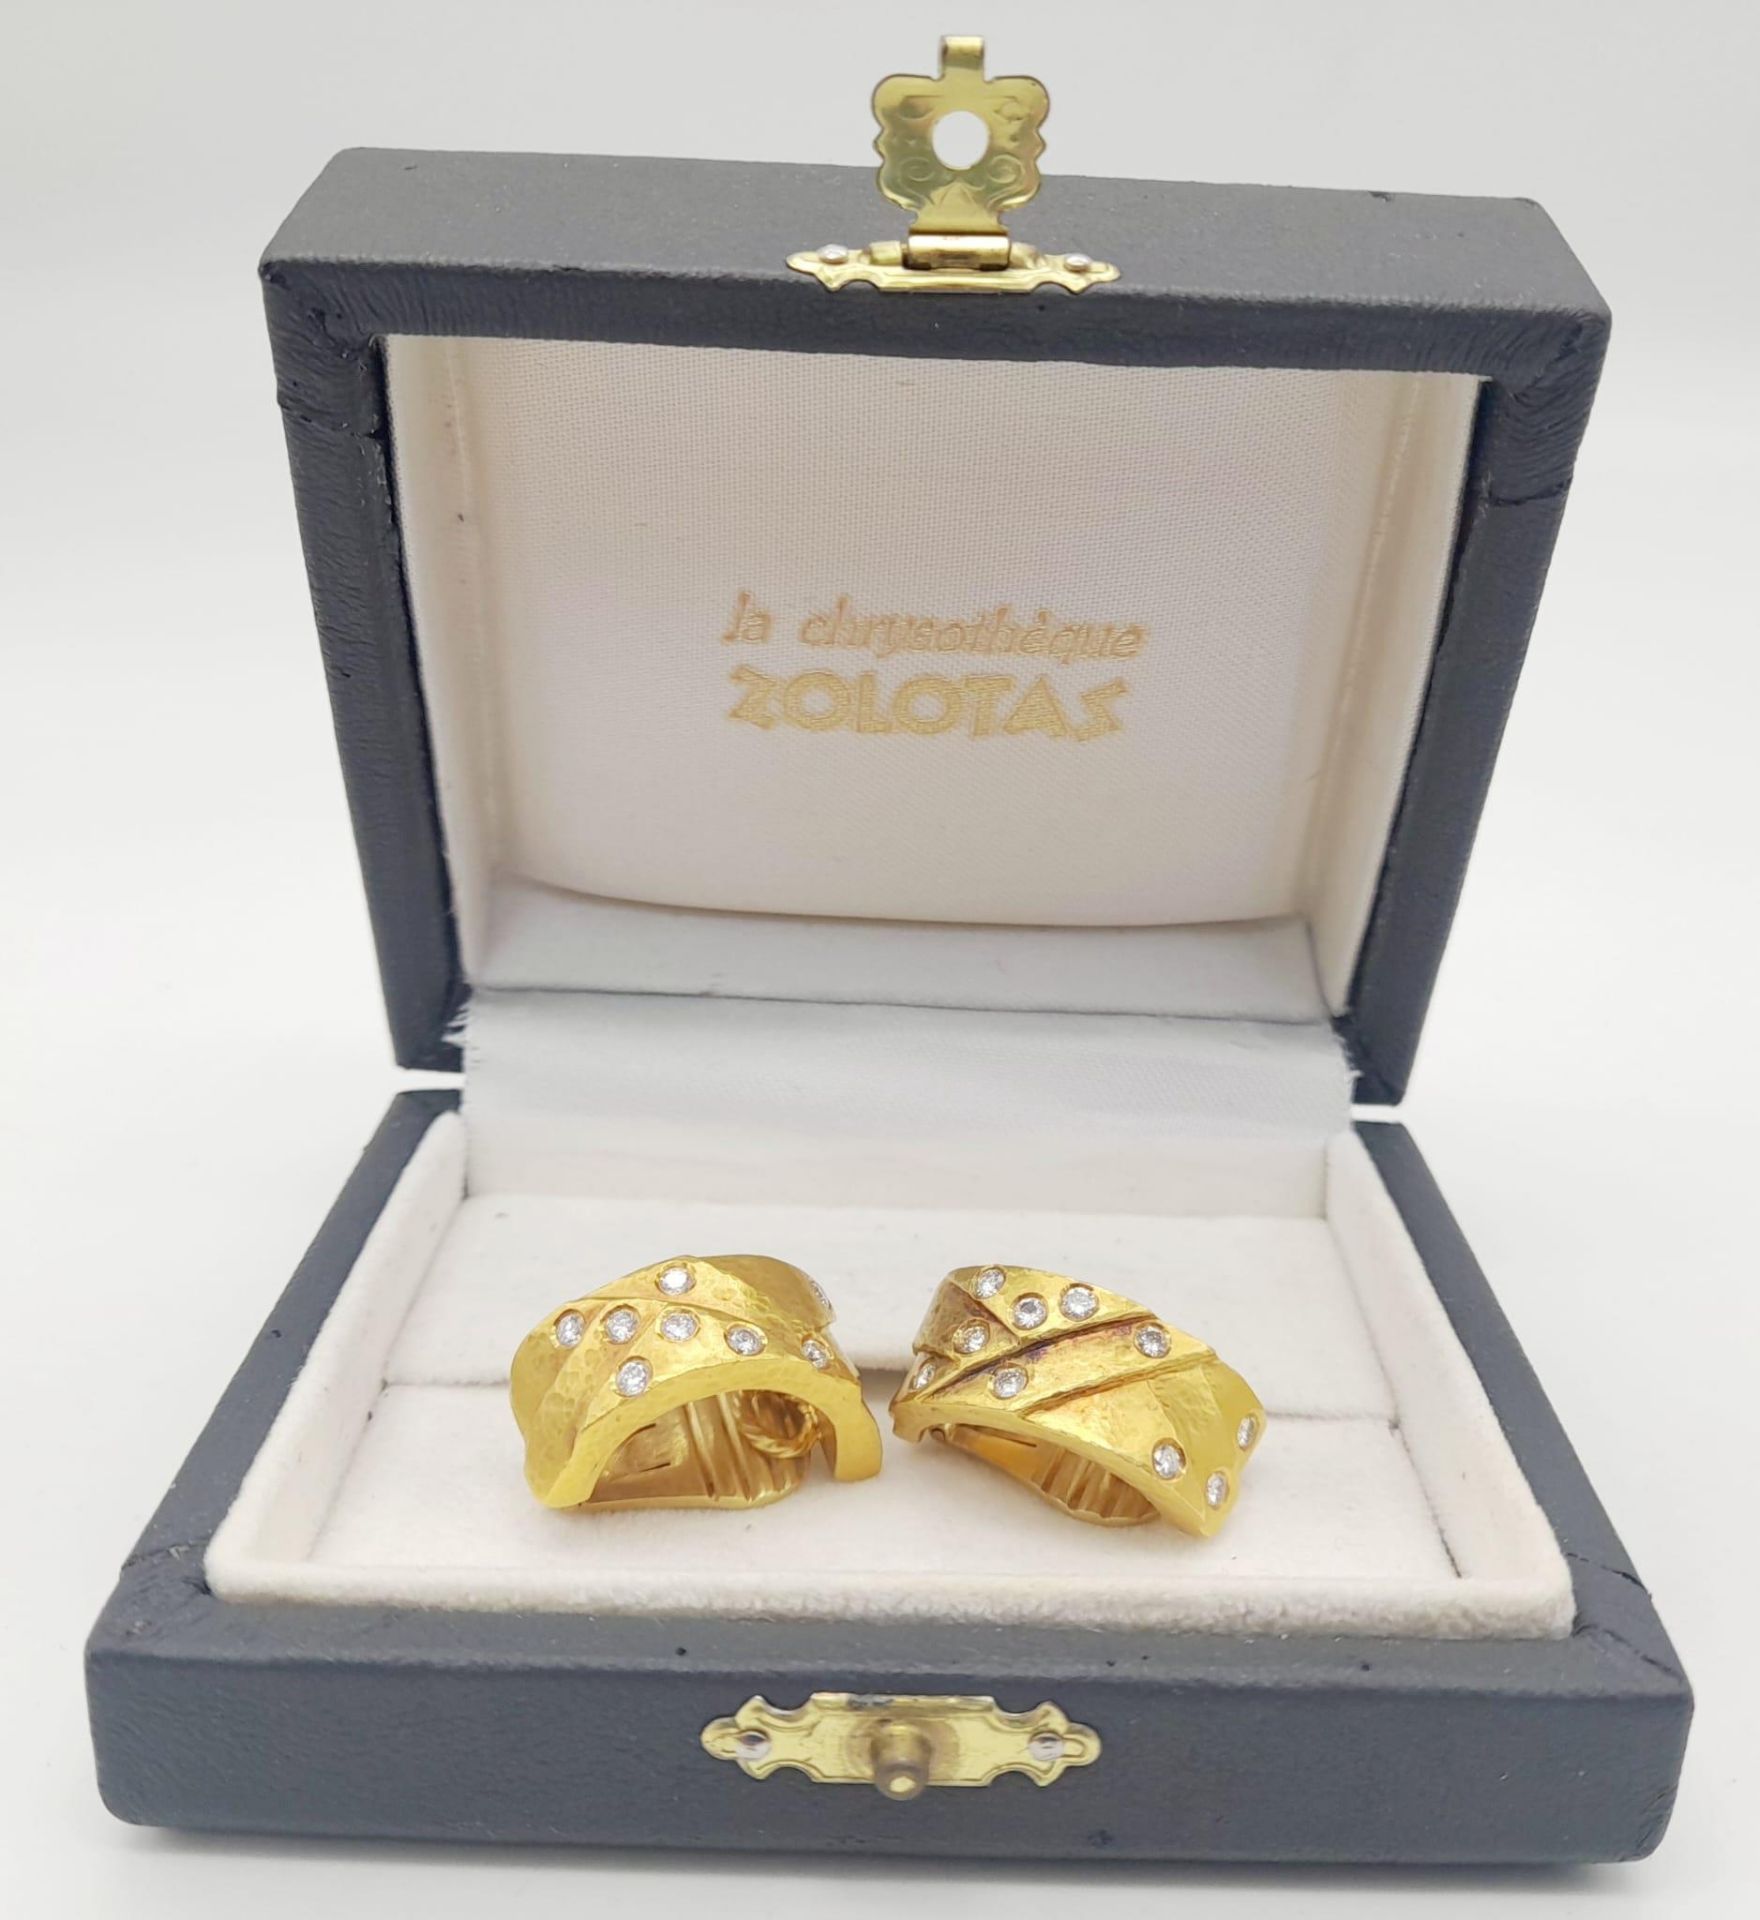 A spectacular 22 K yellow gold clip earrings with diamonds, by the renowned Greek designer